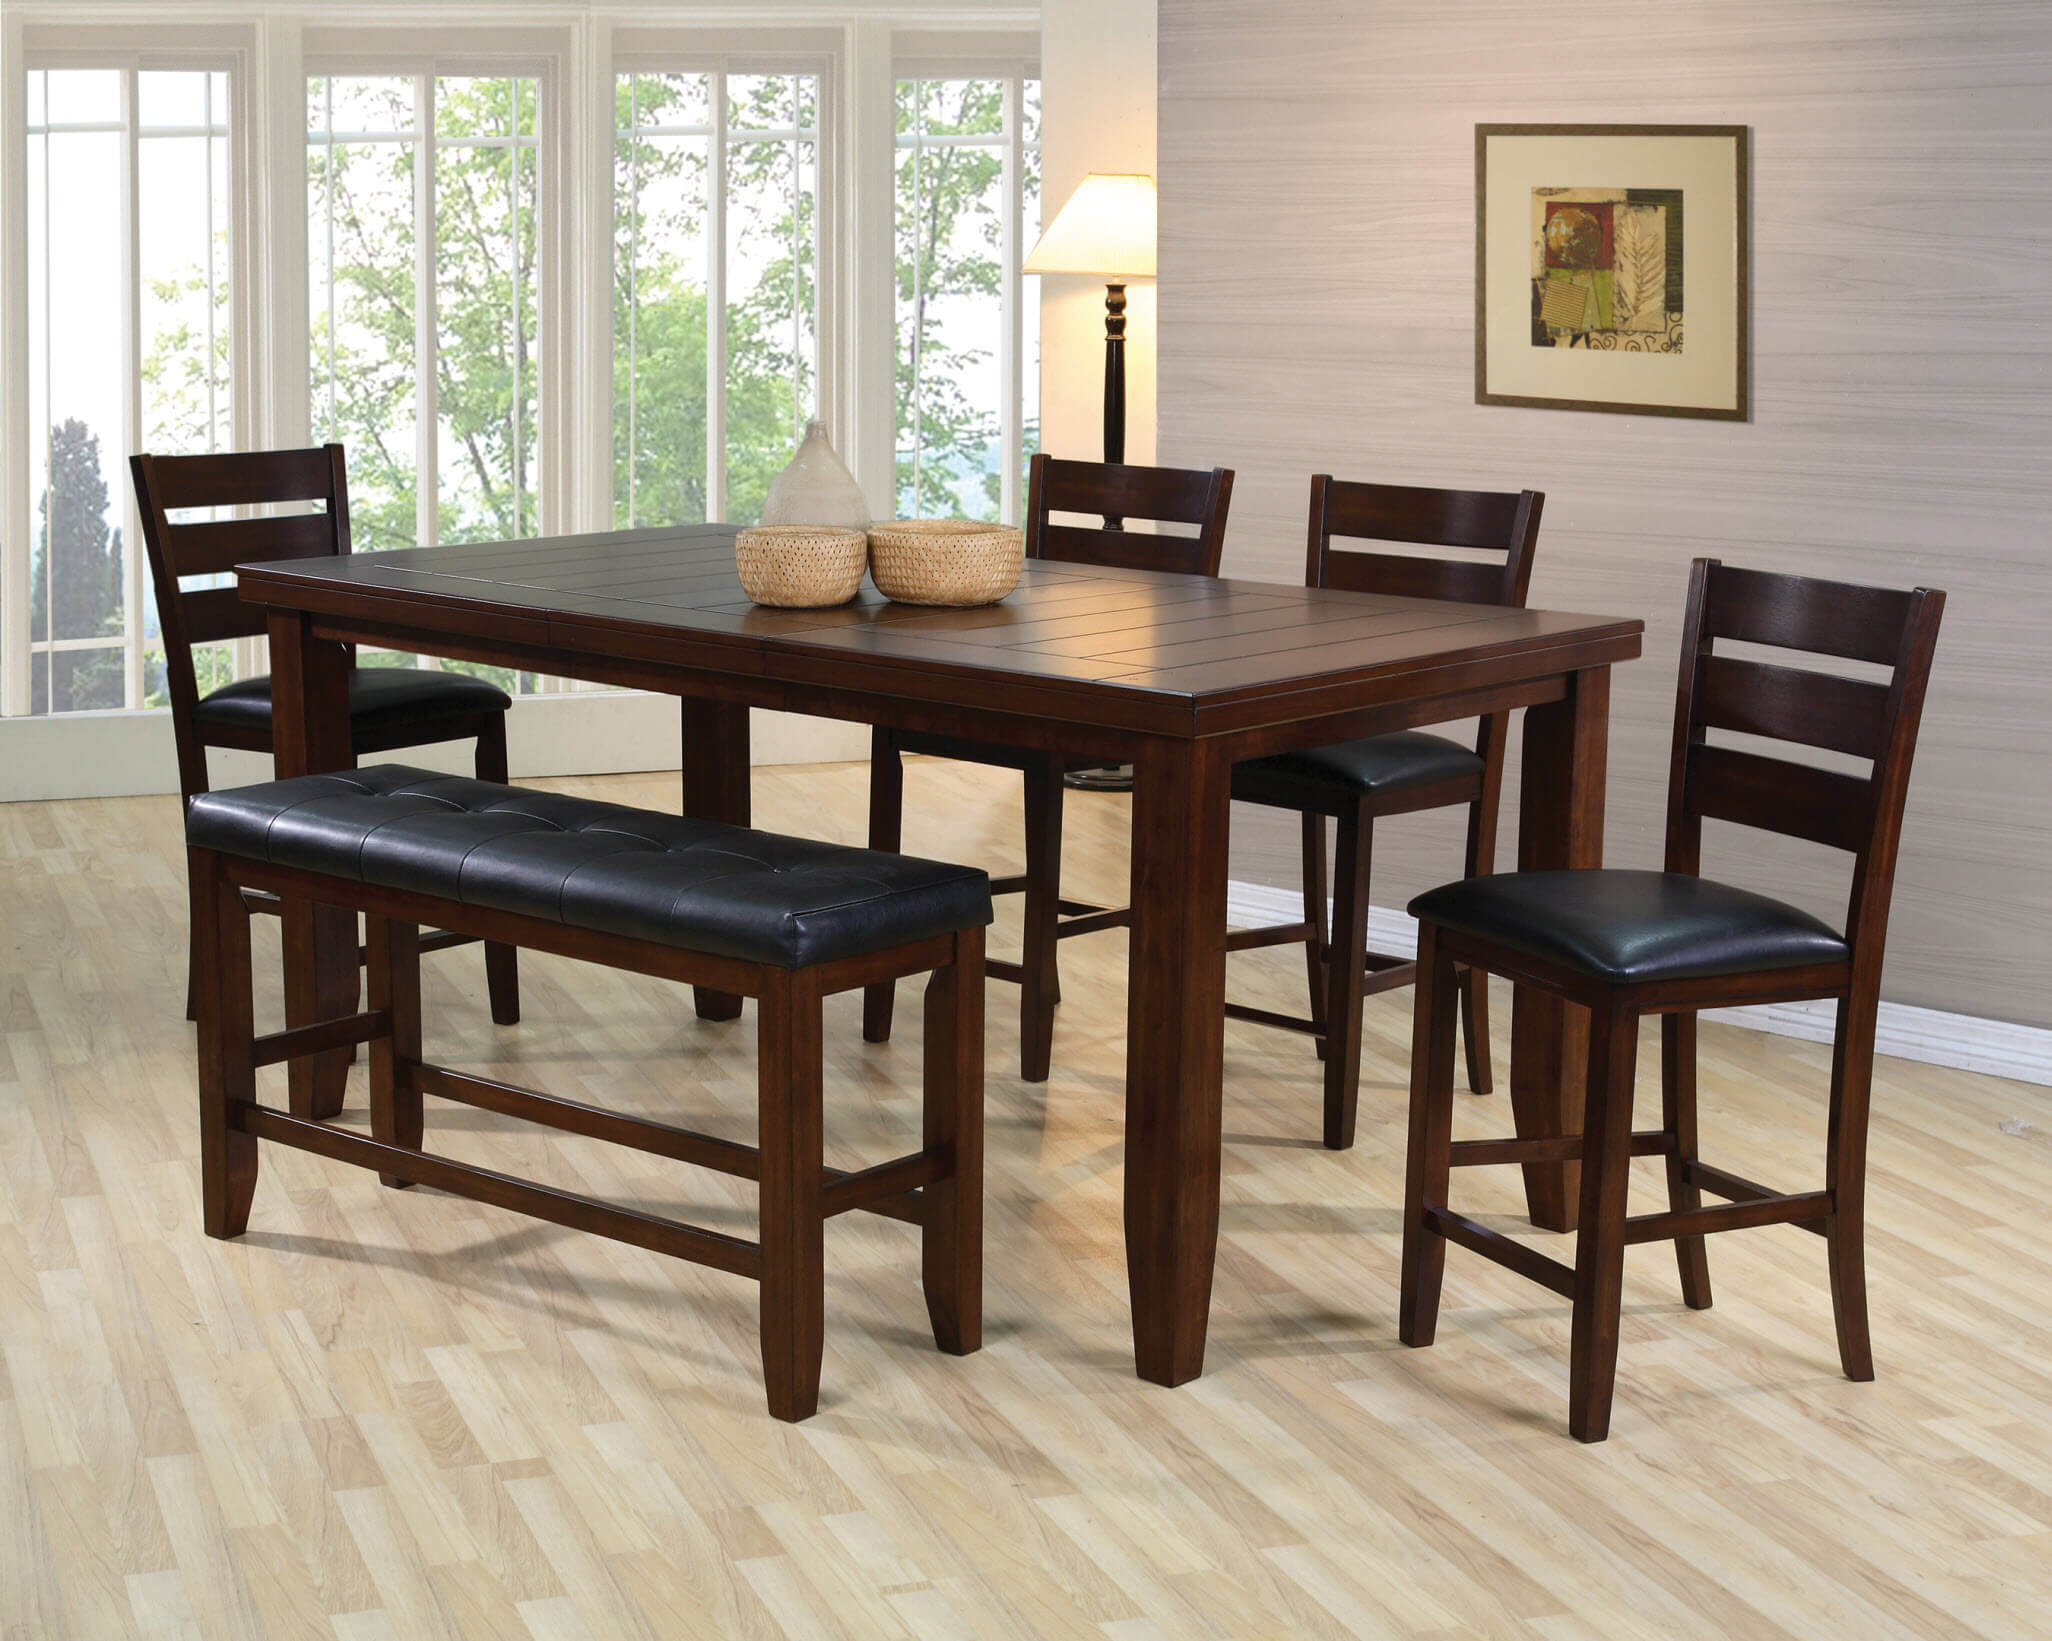 Bardstown Counter Height Dining Room Set | Dining Room Sets